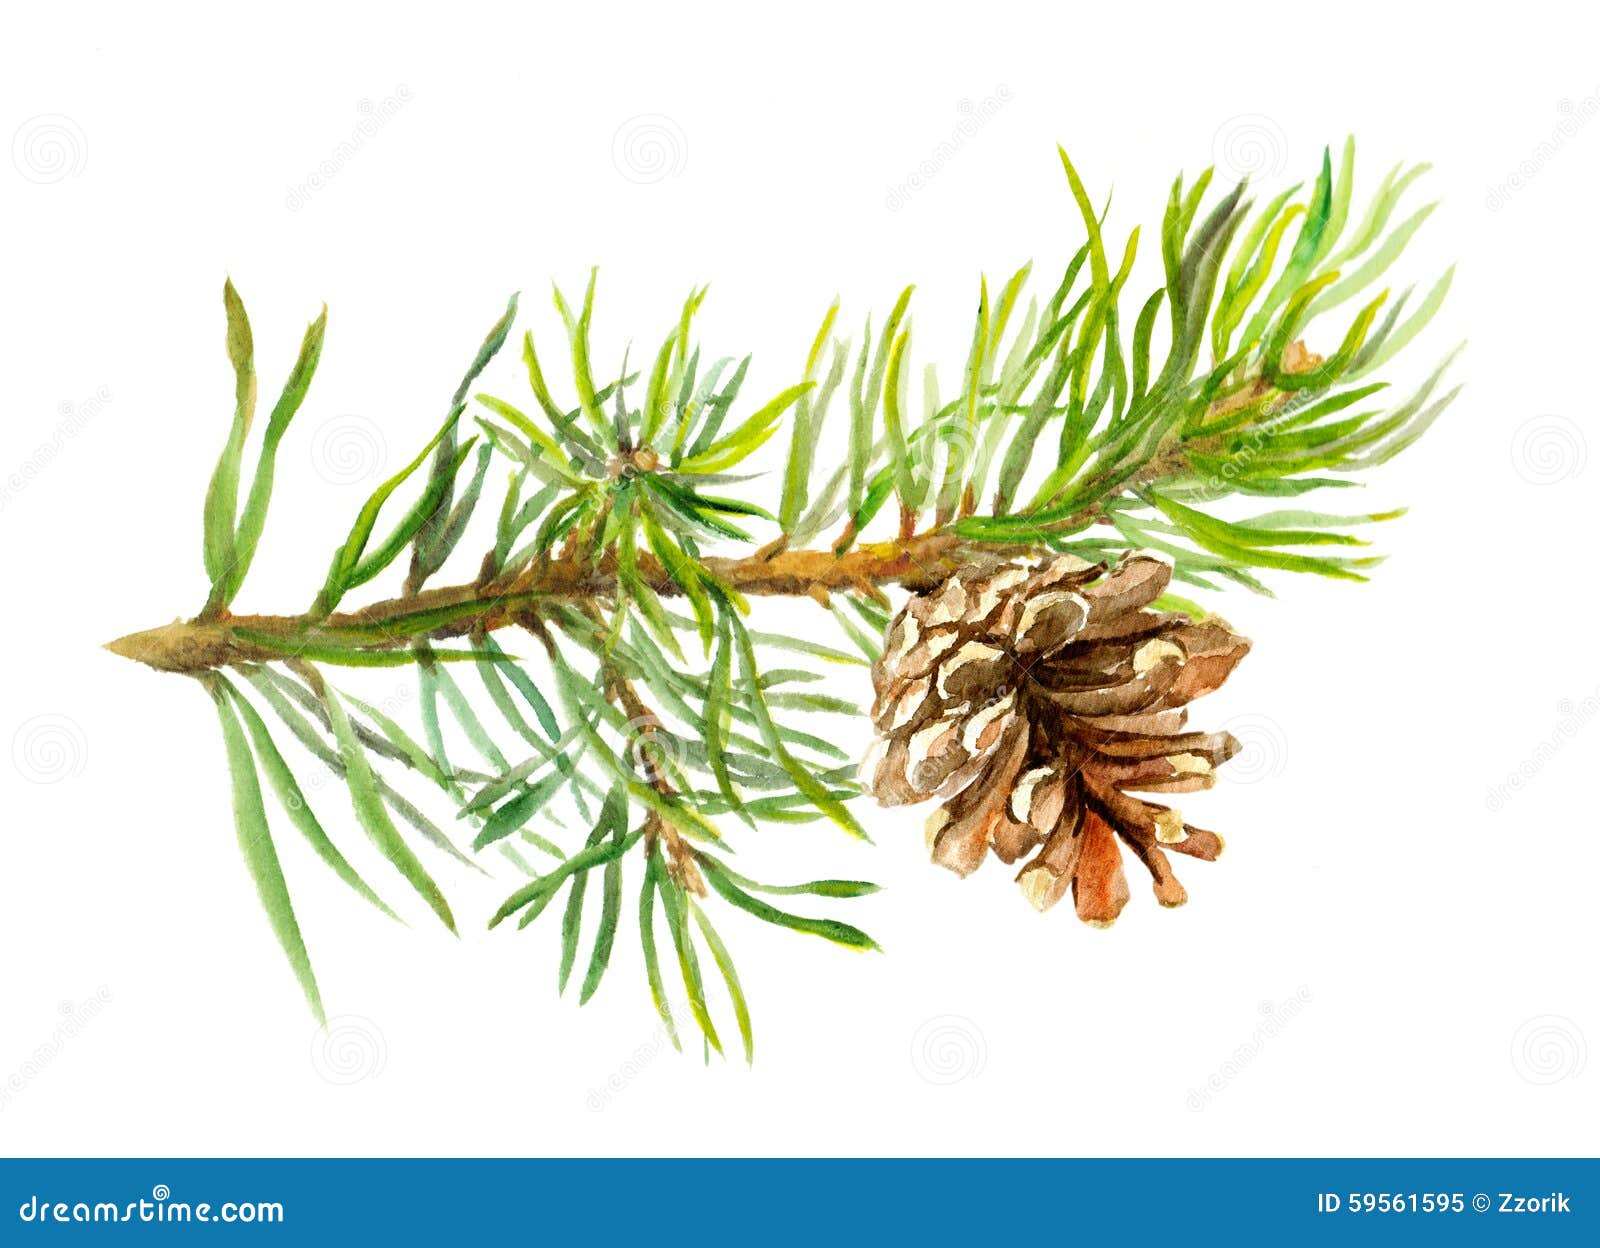 pine tree branch with cone. watercolor